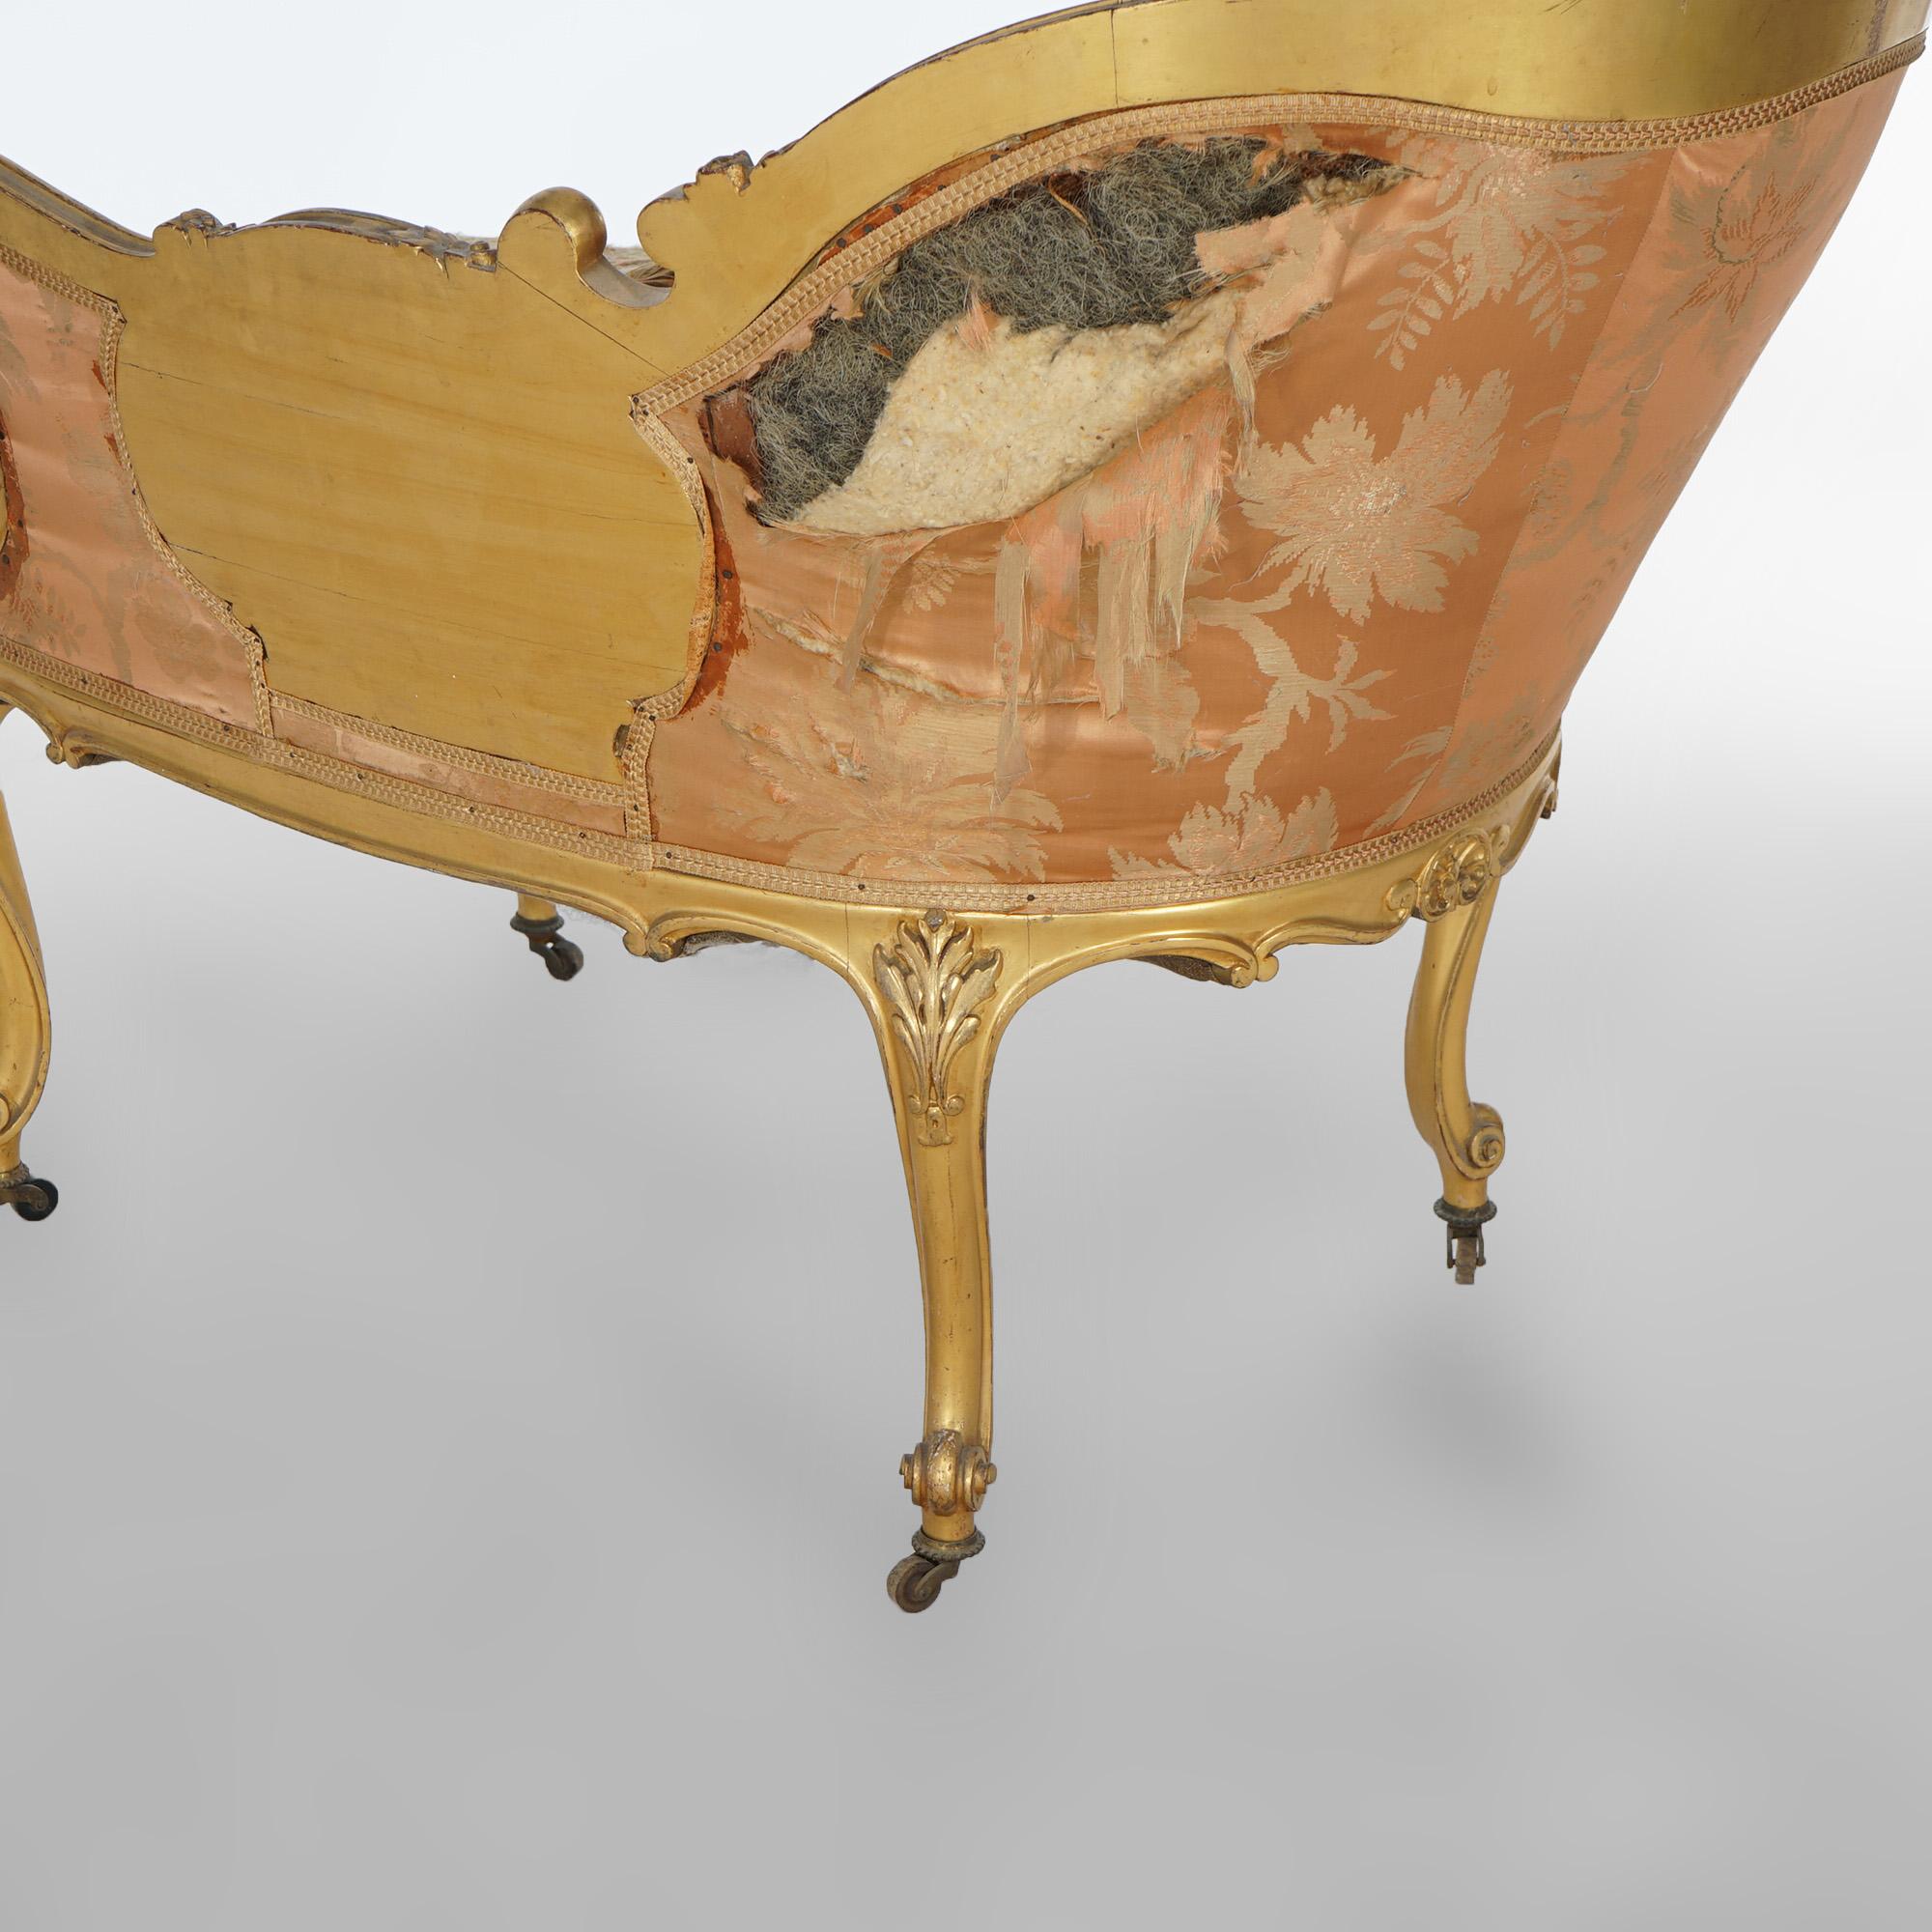 Early Antique French Rococo Vernis Martin & Giltwood Half-Recamier Settee 19th C For Sale 19